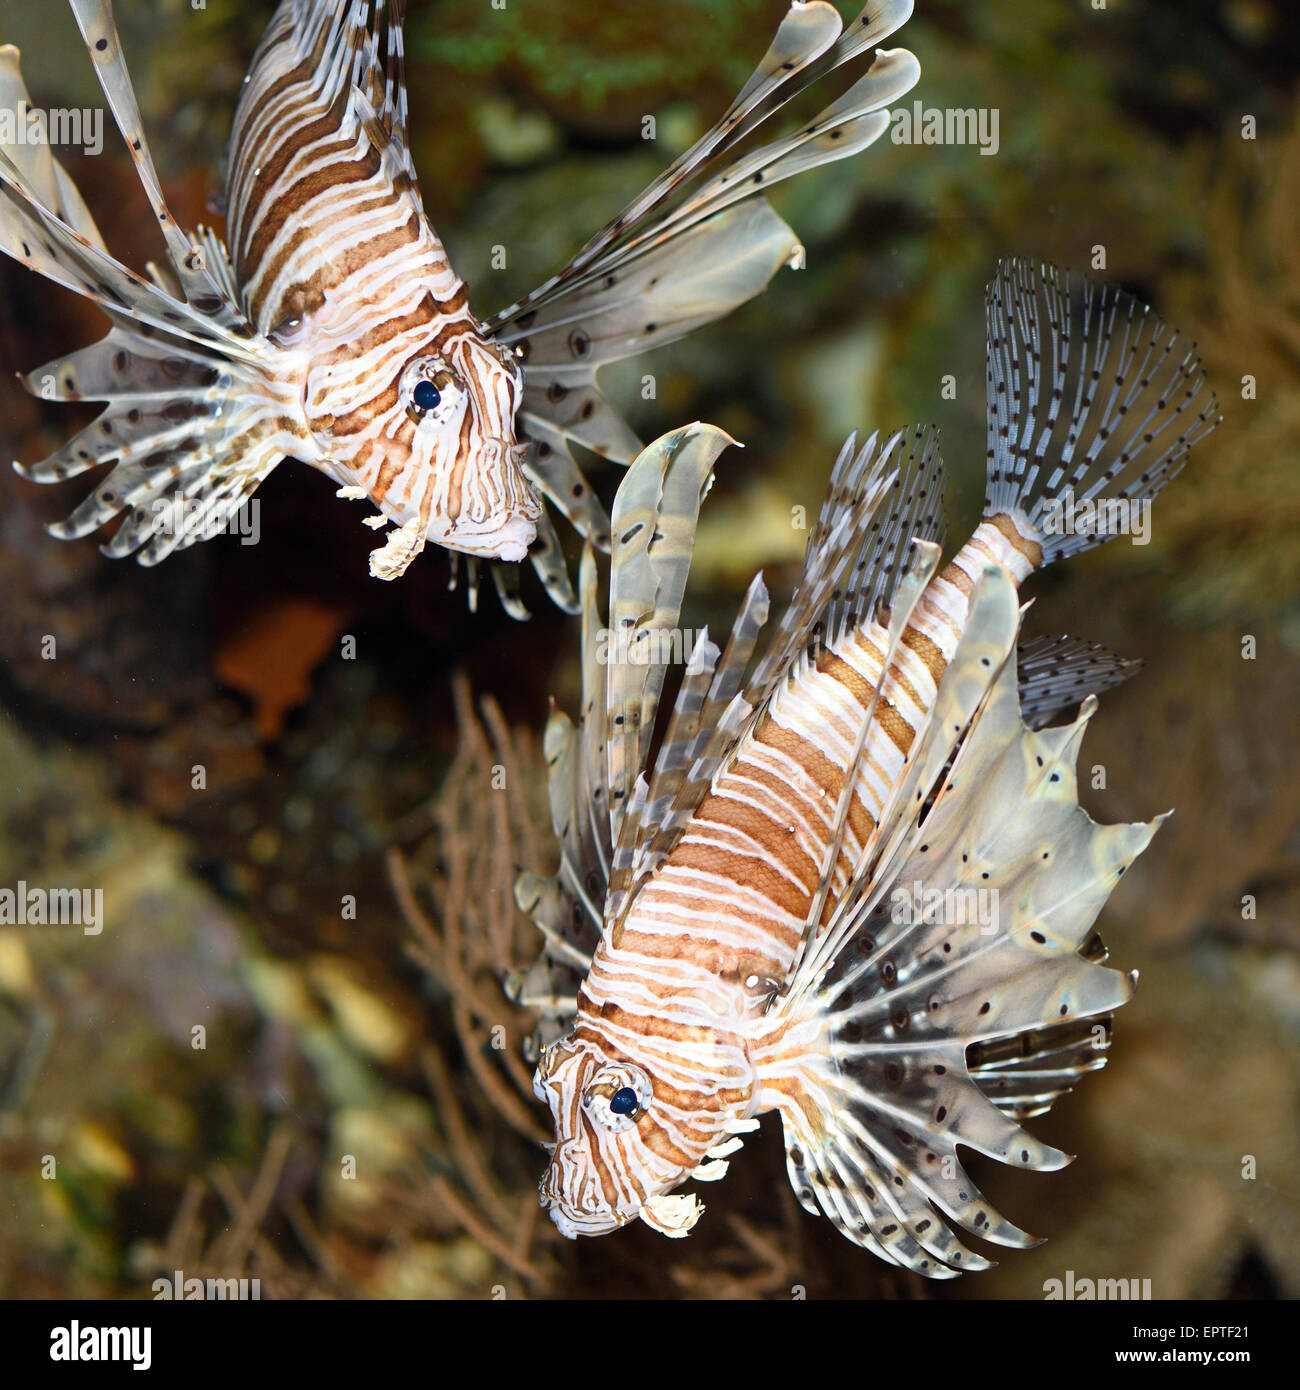 Close-up of two red lionfish (Pterois volitans) in an aquarium, Germany Stock Photo